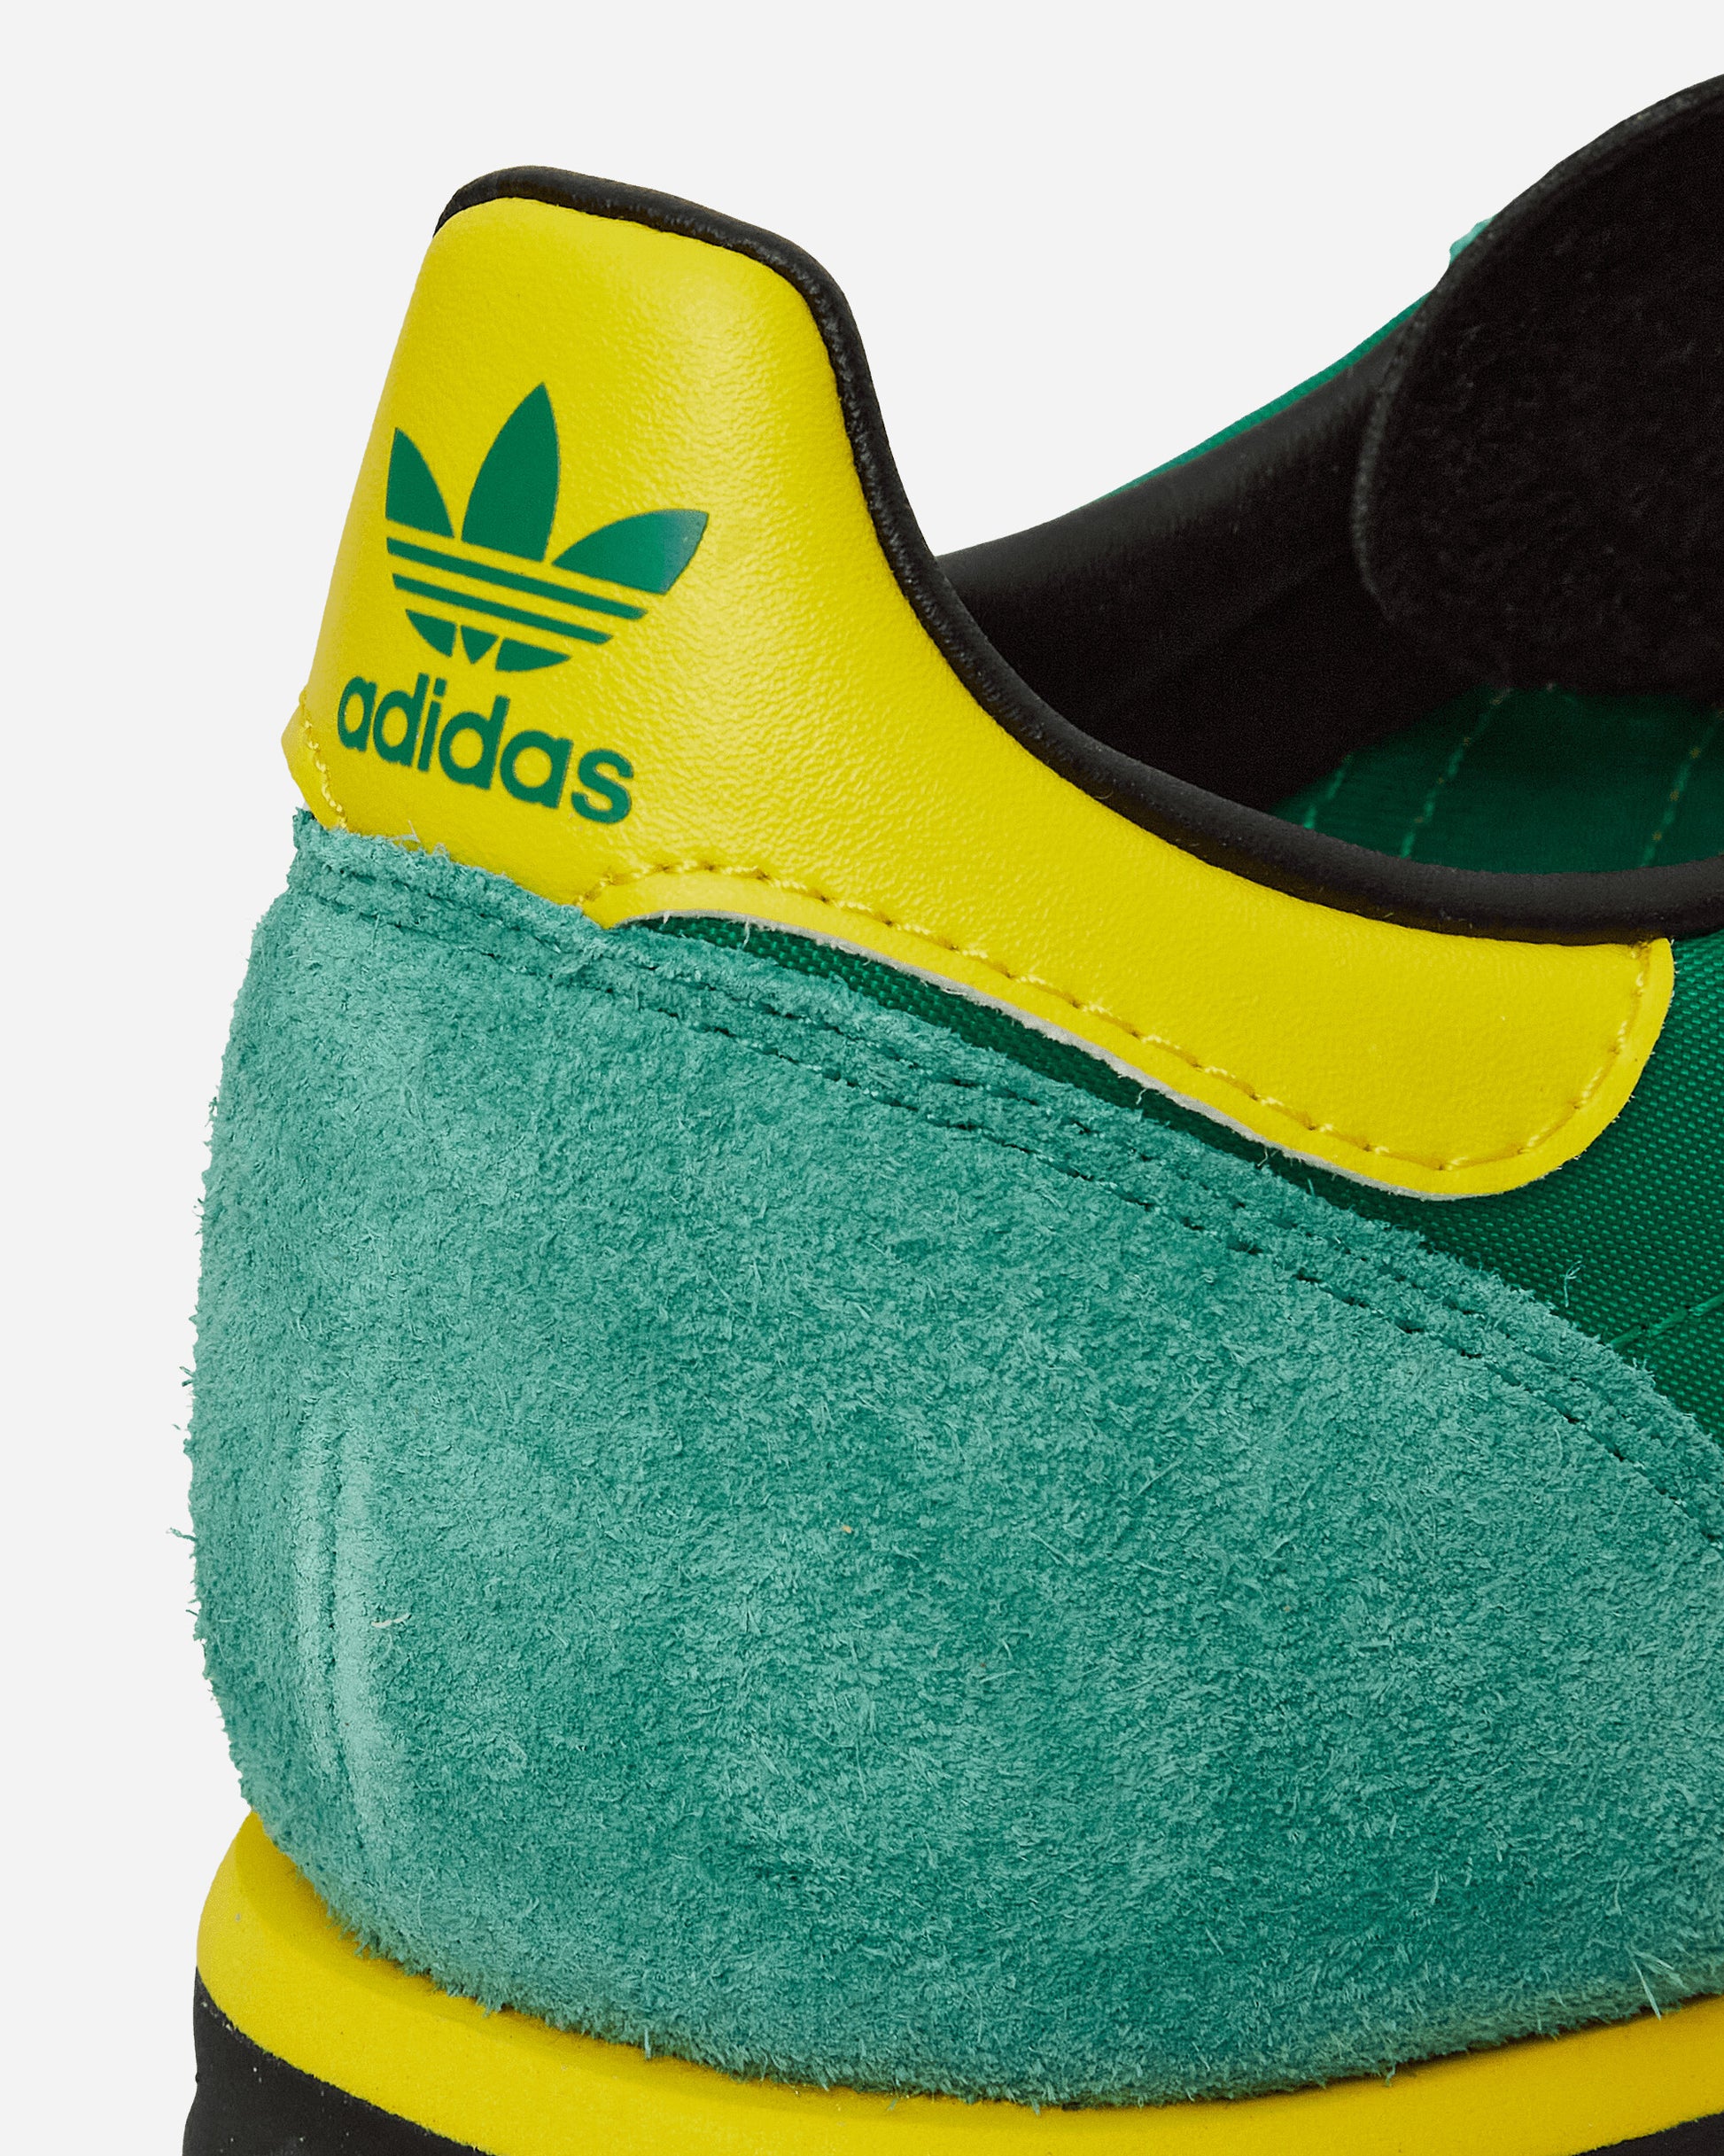 adidas Sl 72 Rs Green/Yellow Sneakers Low IG2133 001